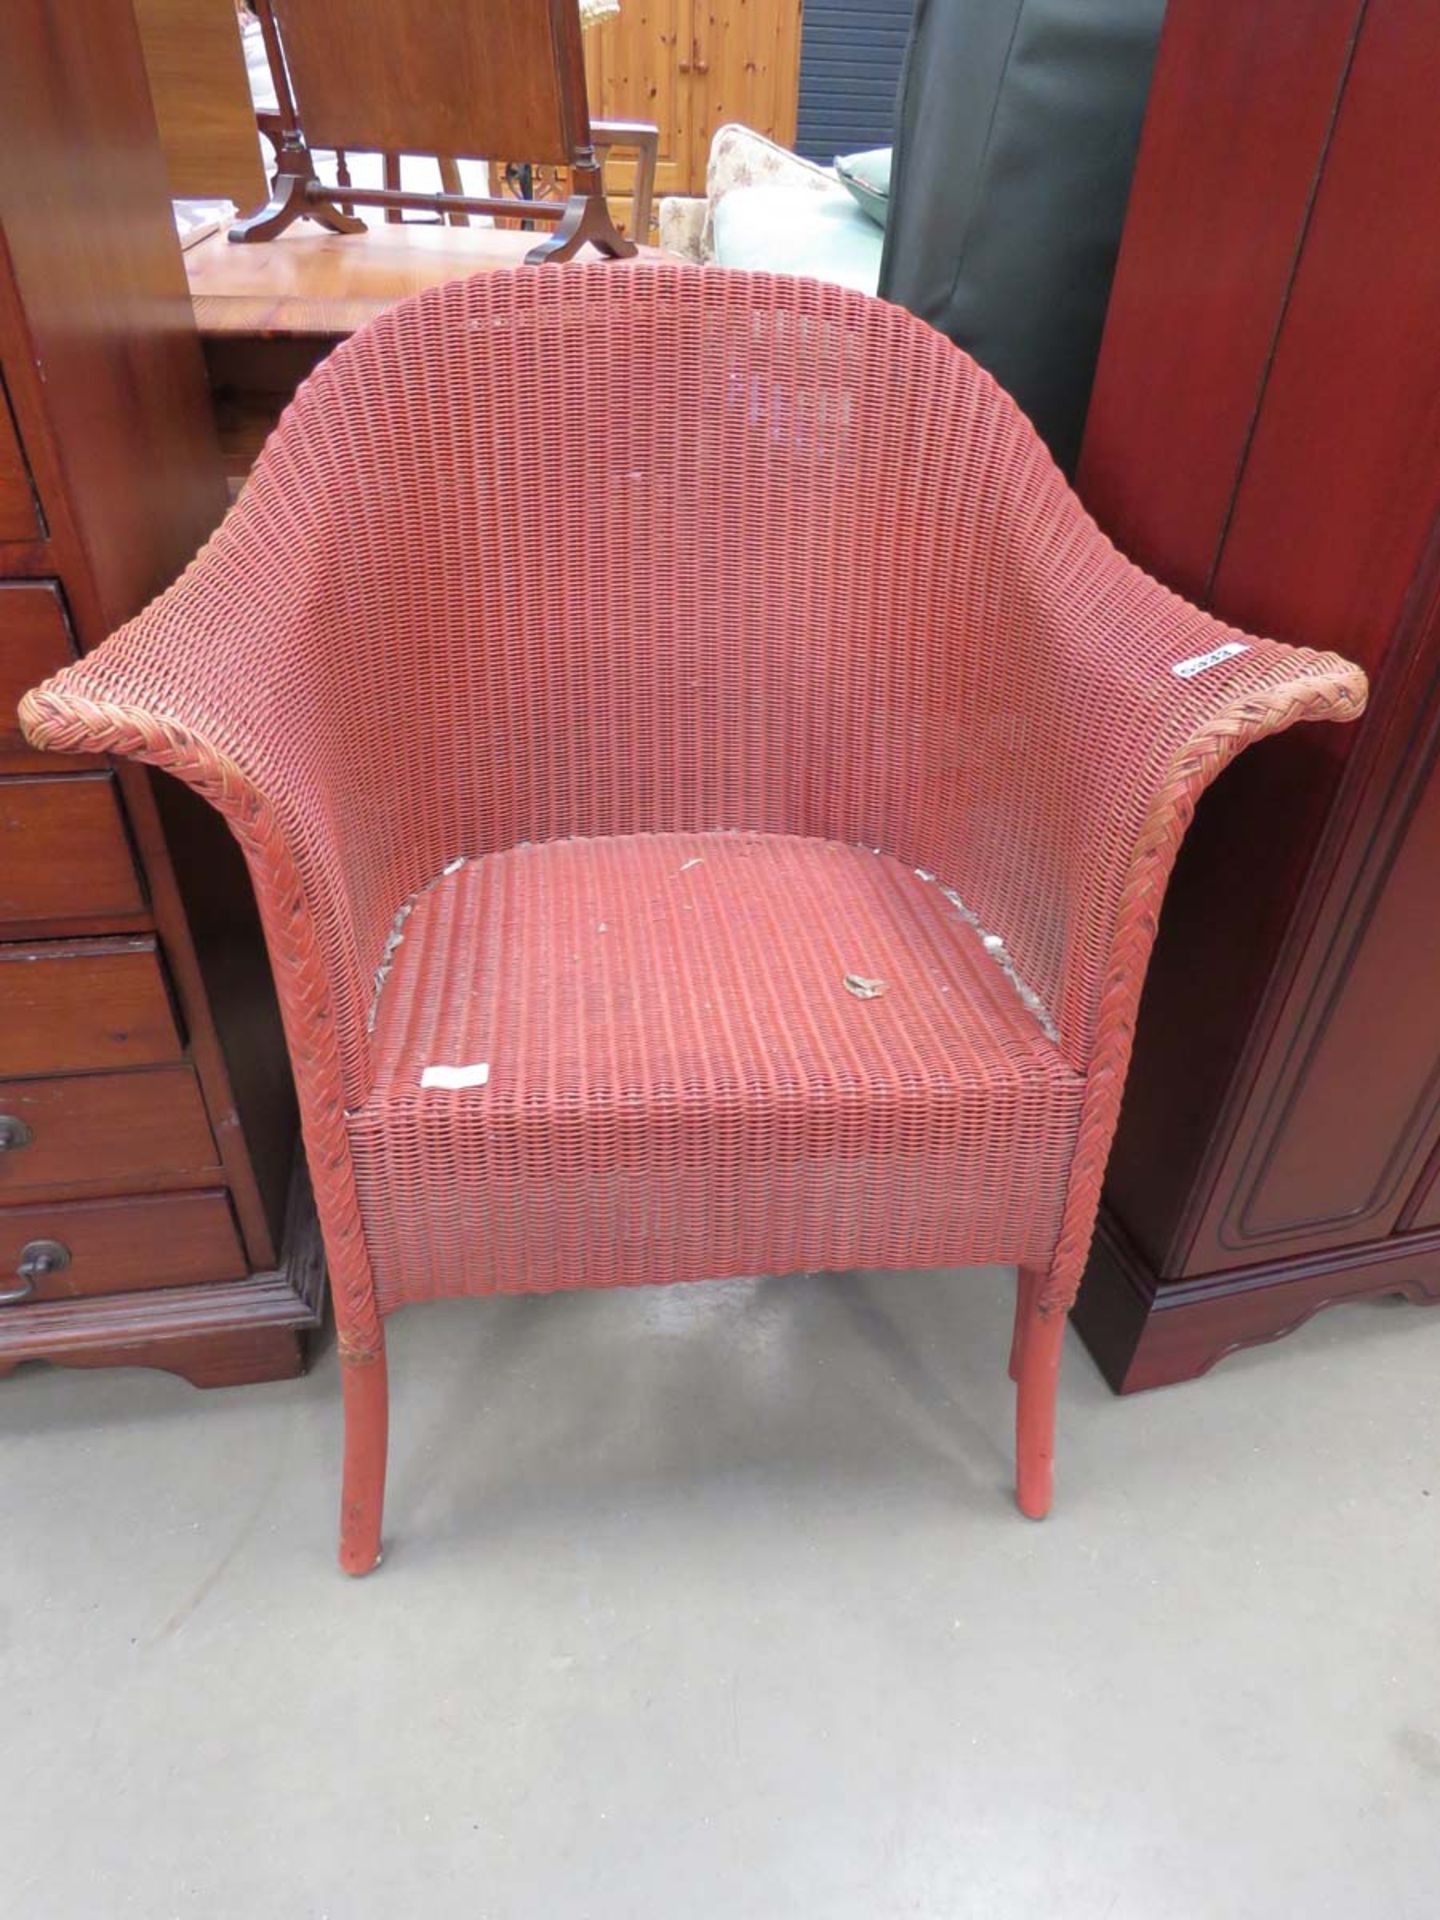 Red painted Lloyd loom style arm chair